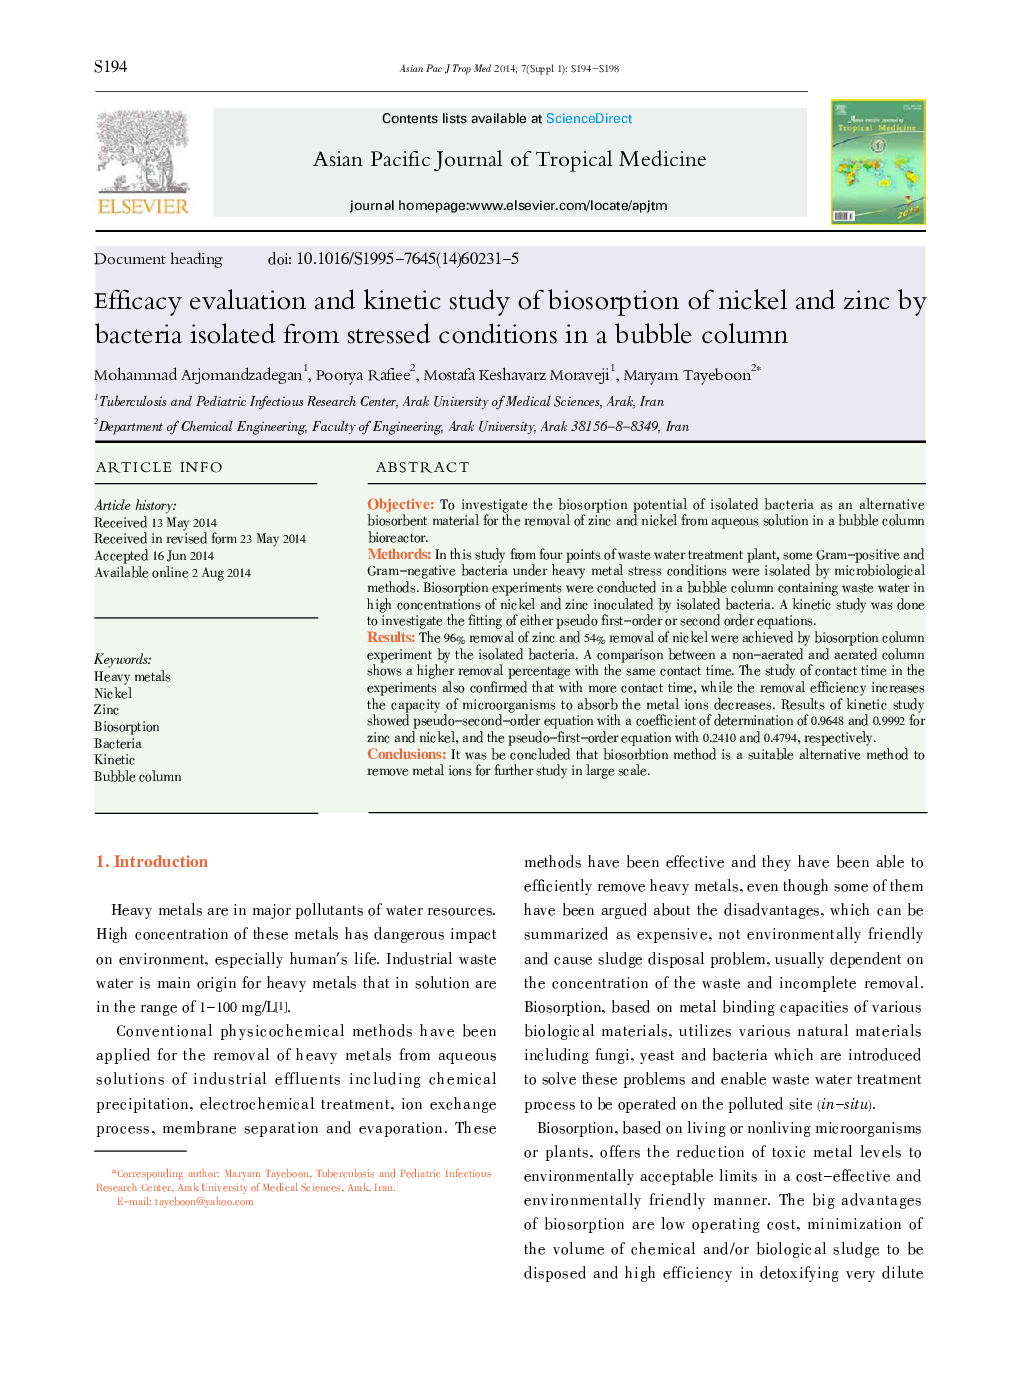 Efficacy evaluation and kinetic study of biosorption of nickel and zinc by bacteria isolated from stressed conditions in a bubble column 